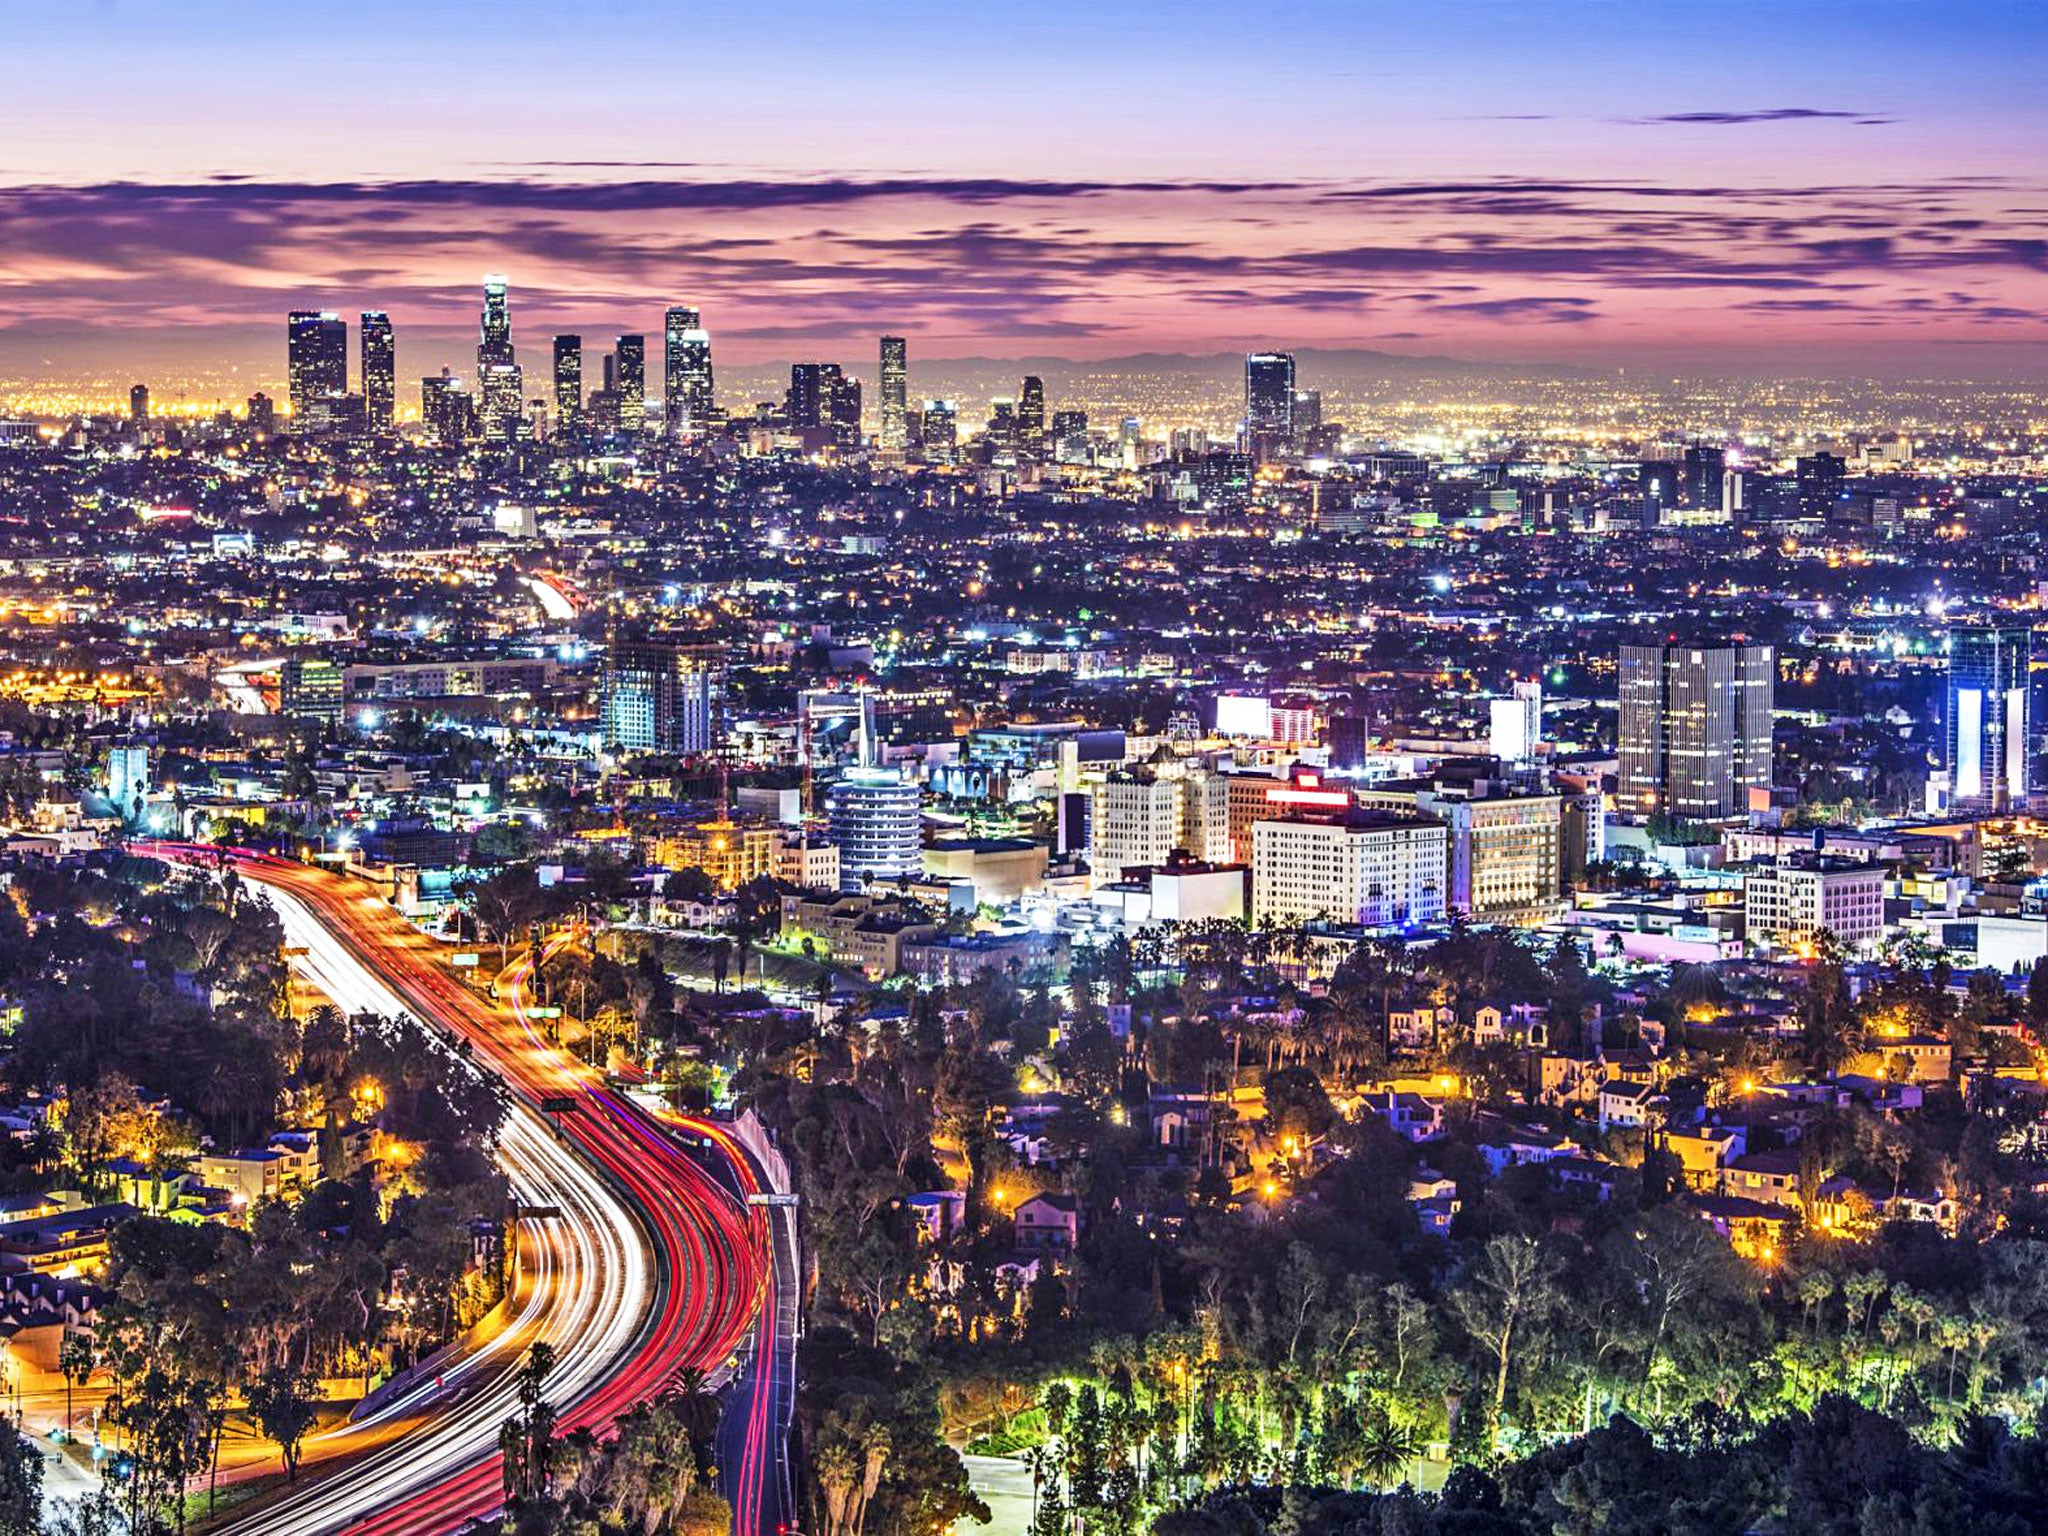 Bright lights, big city break: by starting your trip in Europe, you could fly to Los Angeles for less